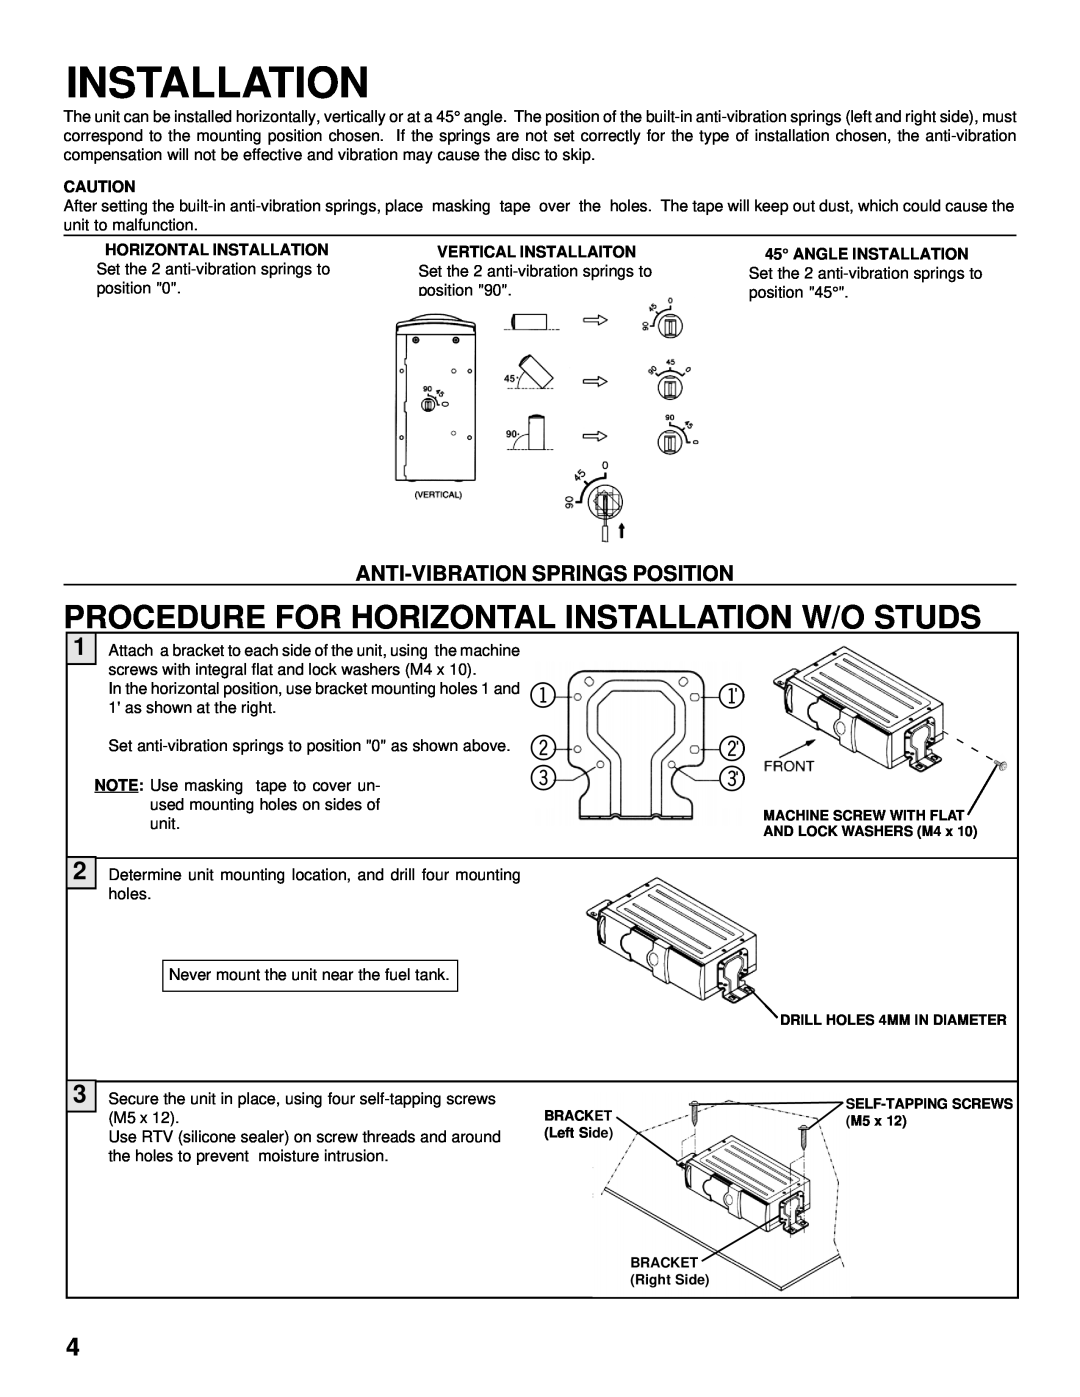 Audiovox SP-11CDS installation manual Procedure For Horizontal Installation W/O Studs, Anti-Vibrationsprings Position 